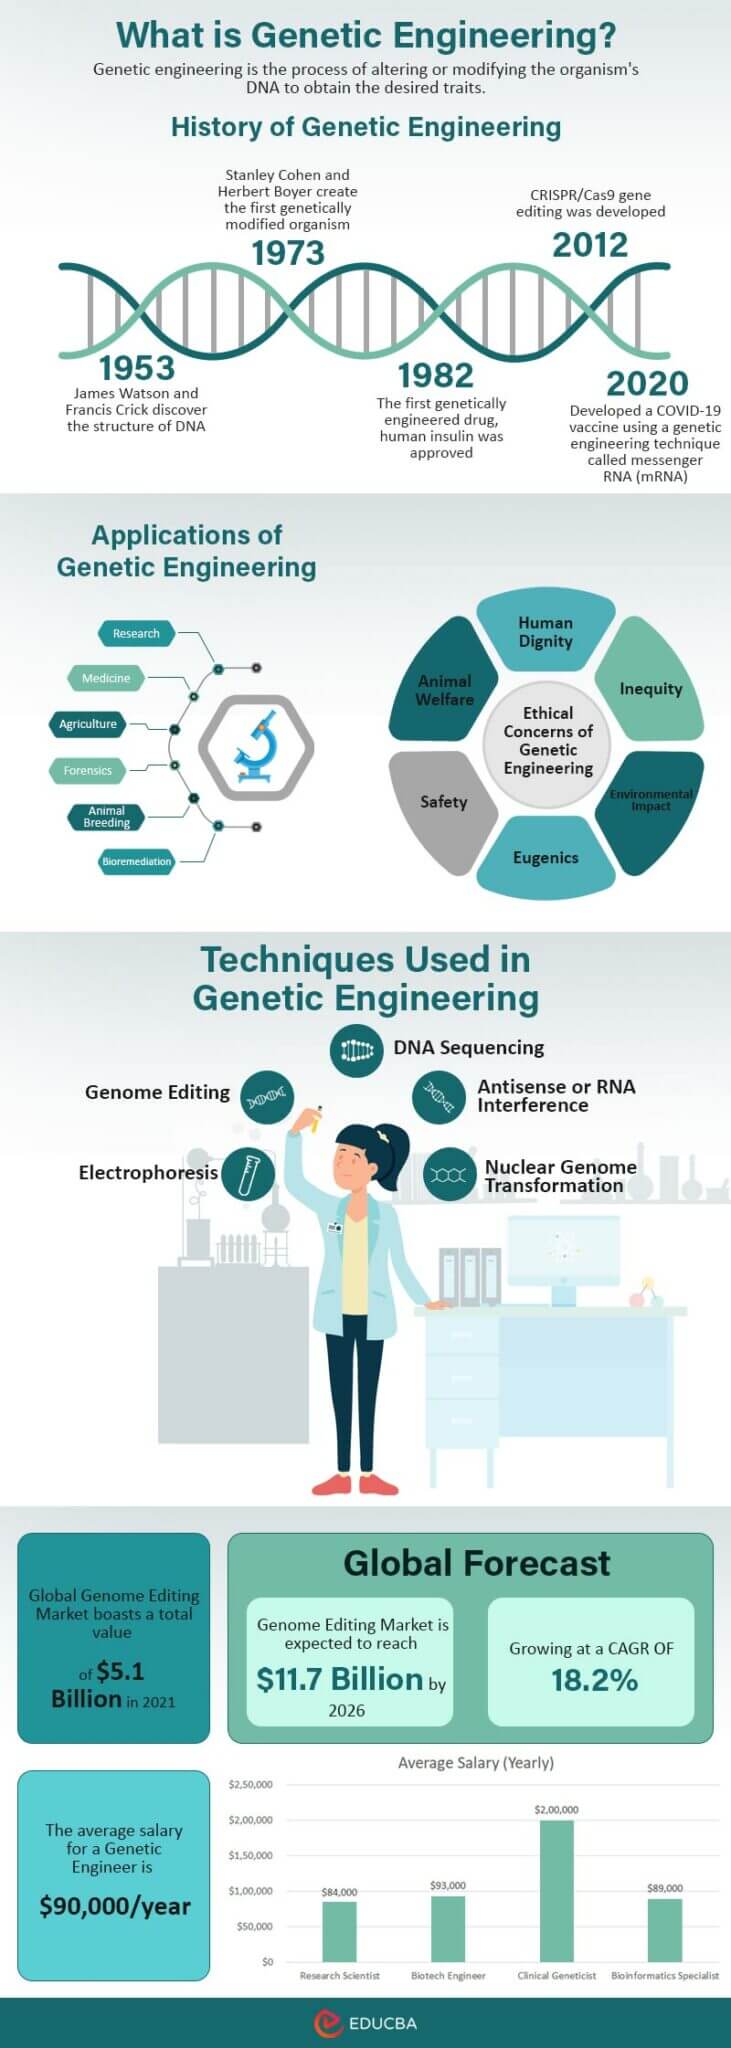 advantages and disadvantages of genetic engineering essay brainly